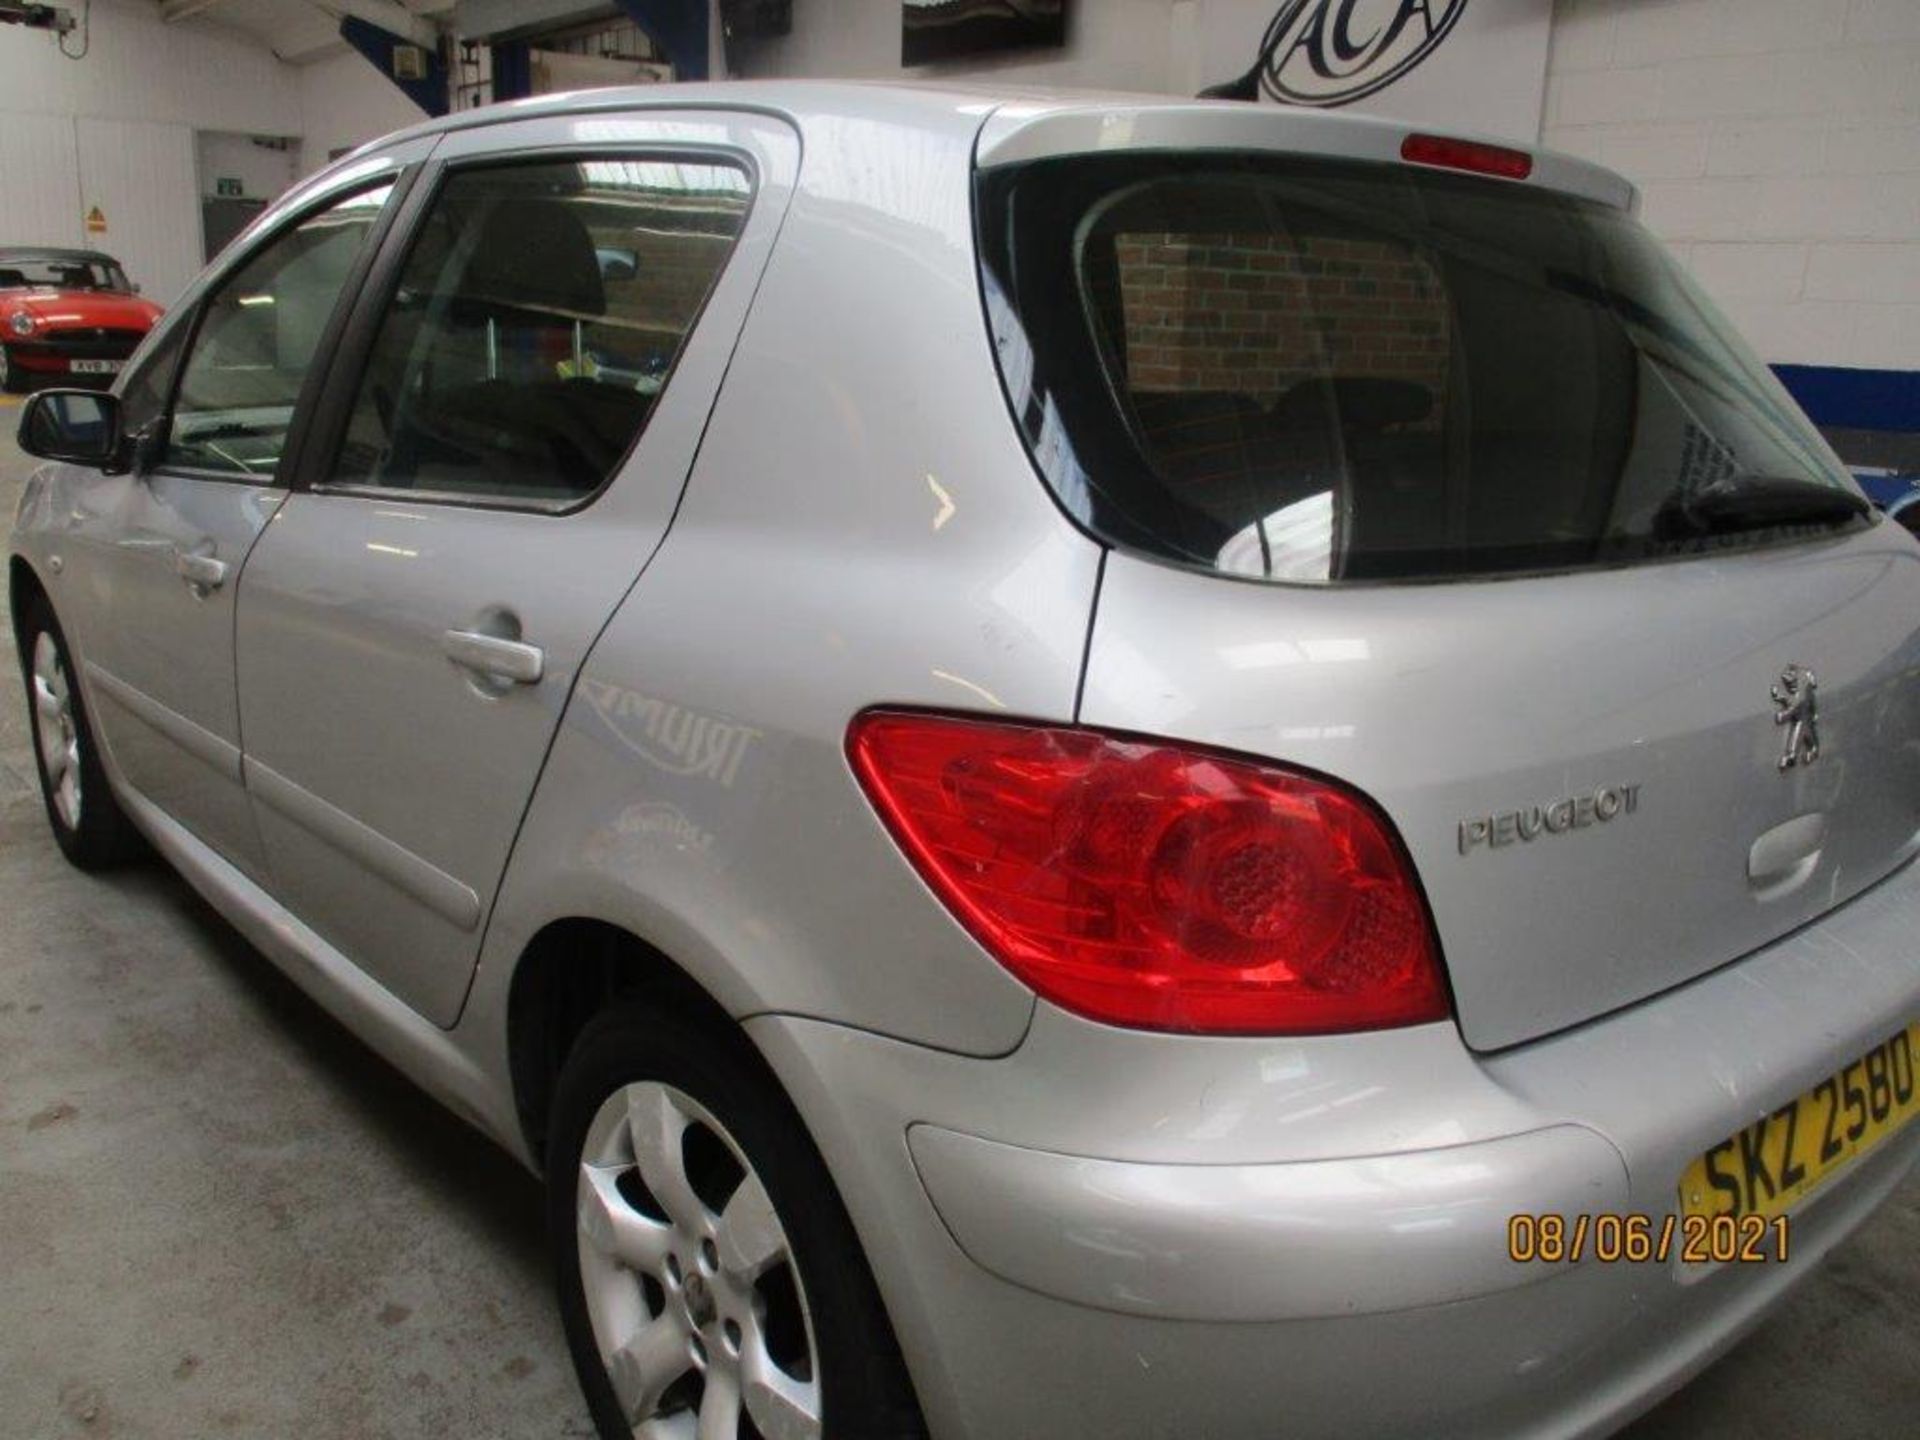 56 06 Peugeot 307 S - Image 12 of 21